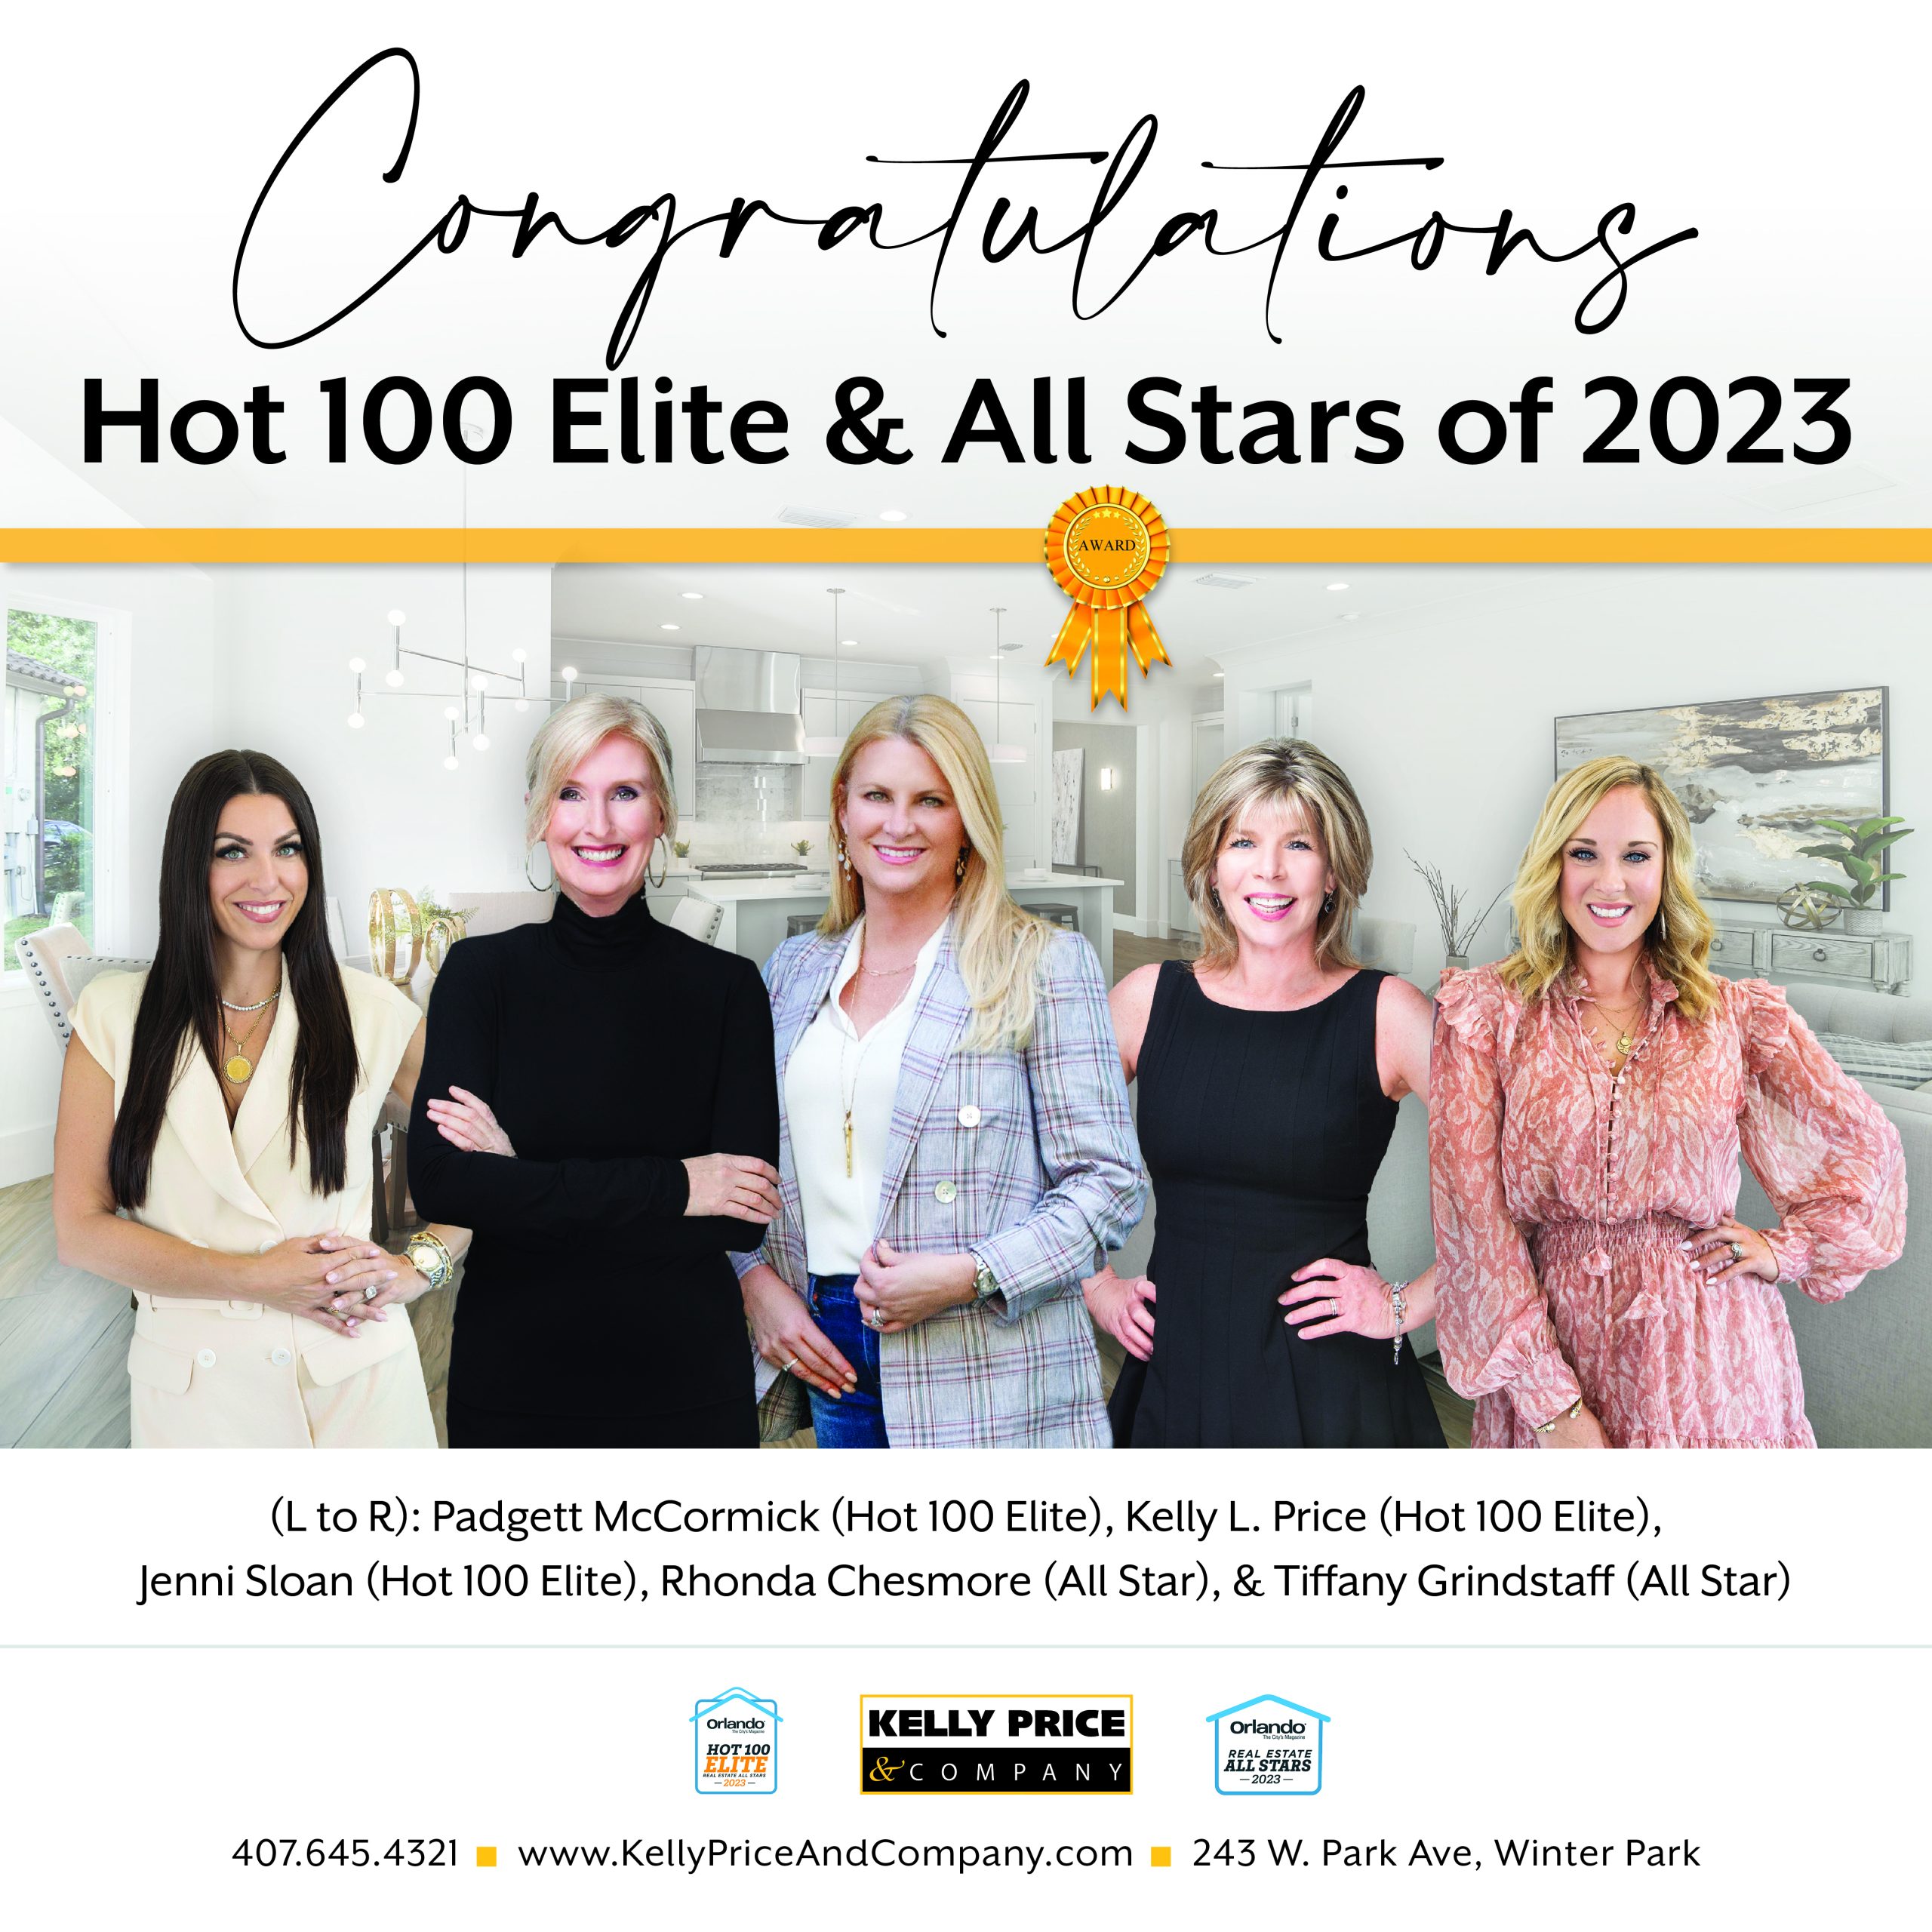 Kelly Price & Company's Hot 100 Elite & All Stars of 2023. Pictured left to right: Padgett McCormick, Kelly L. Price, Jenni Sloan, Rhonda Chesmore, & Tiffany Grindstaff